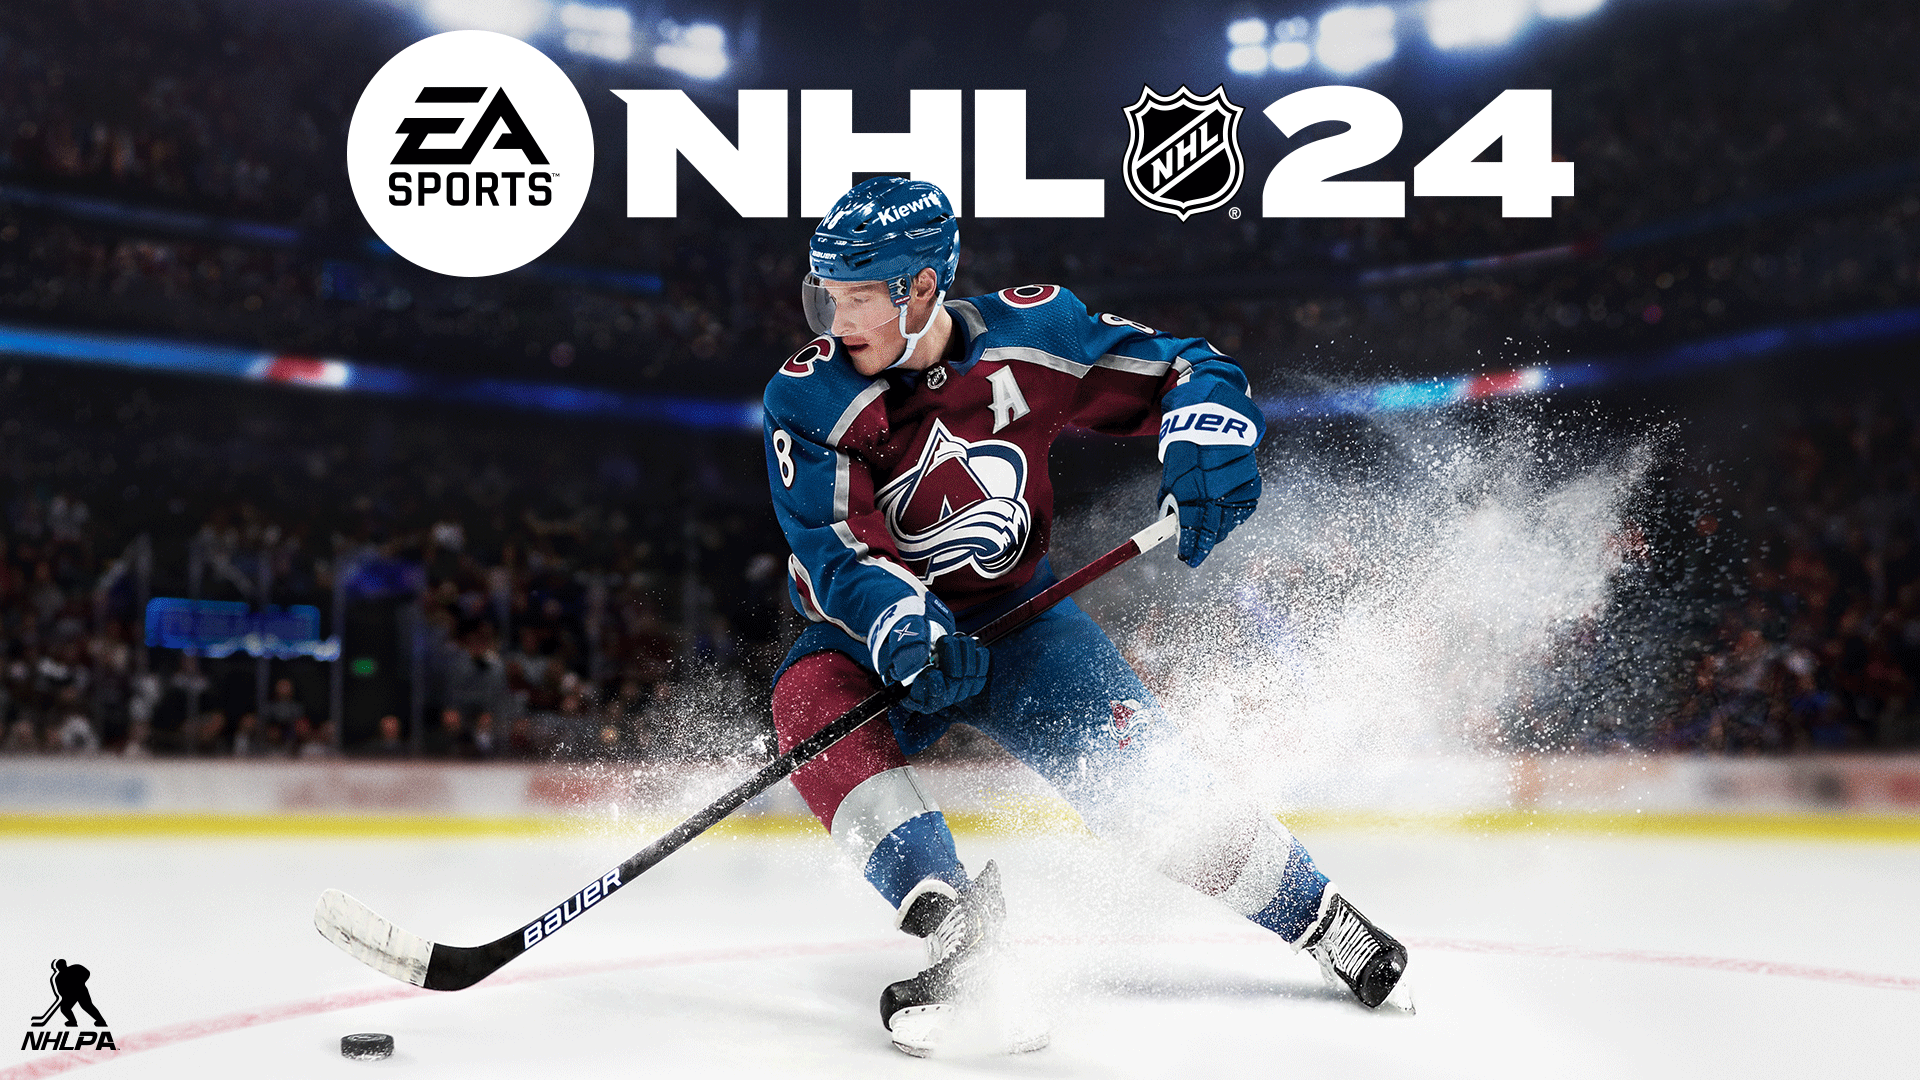 NHL 24 Cover is Athlete Cale Makar Operation Sports